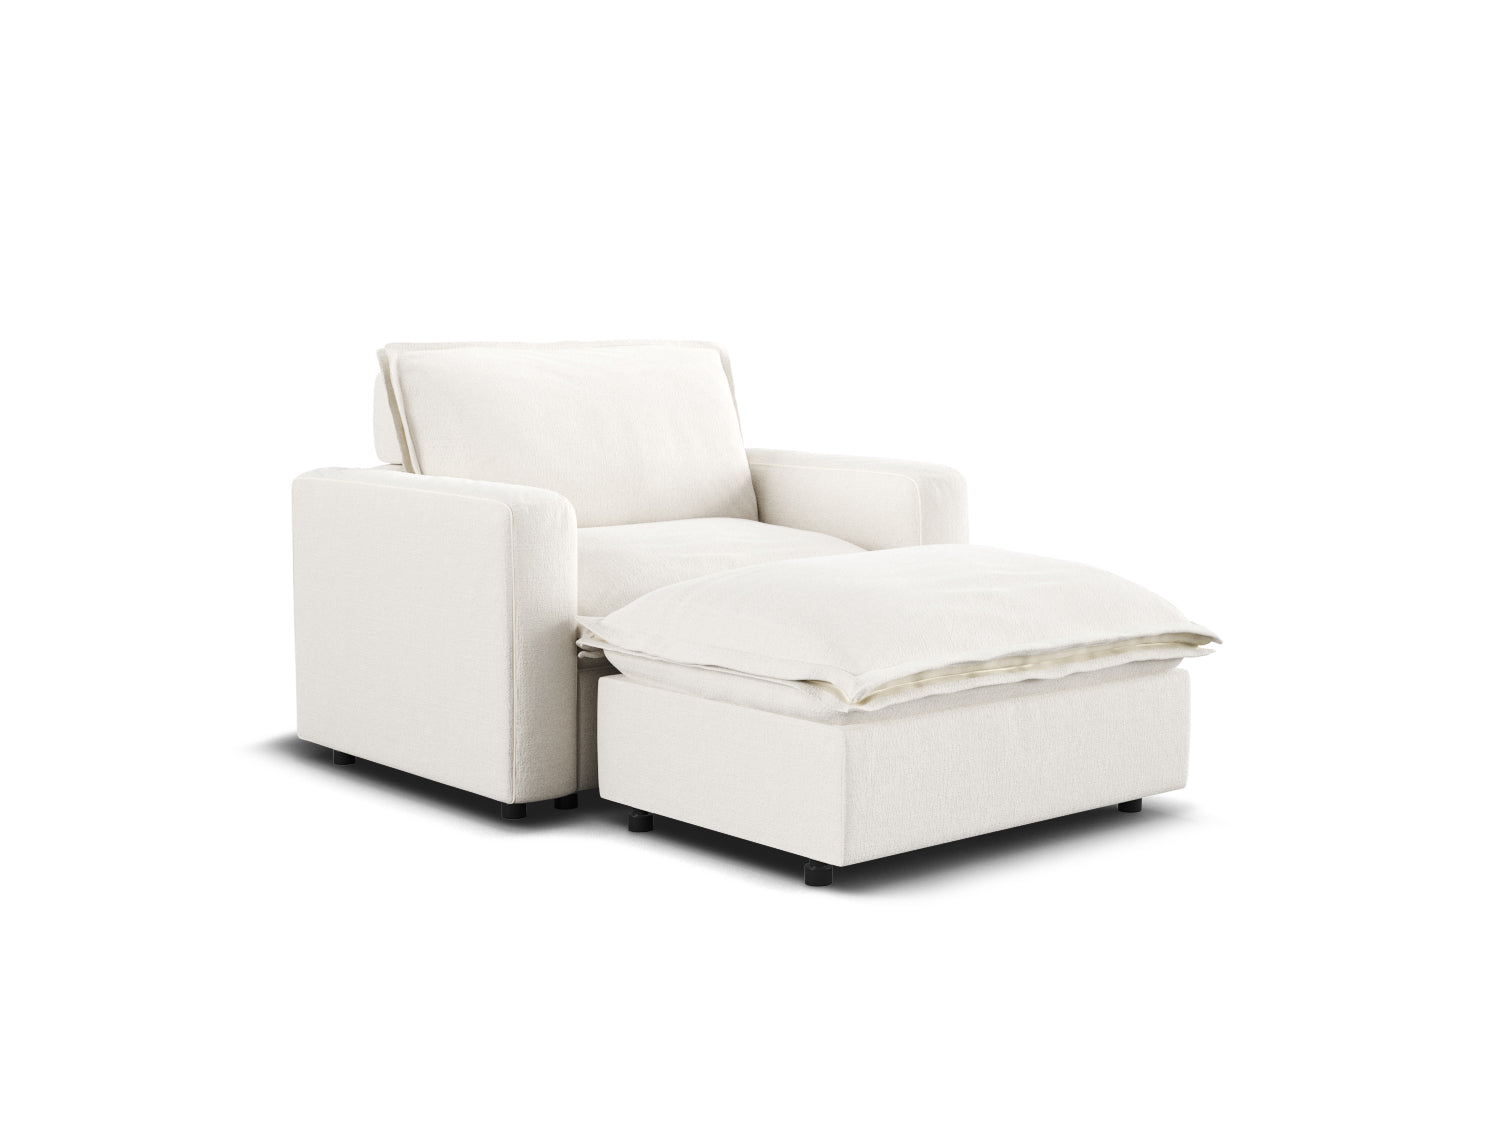 Chaise lounge chair in white linen, armchair with ottoman